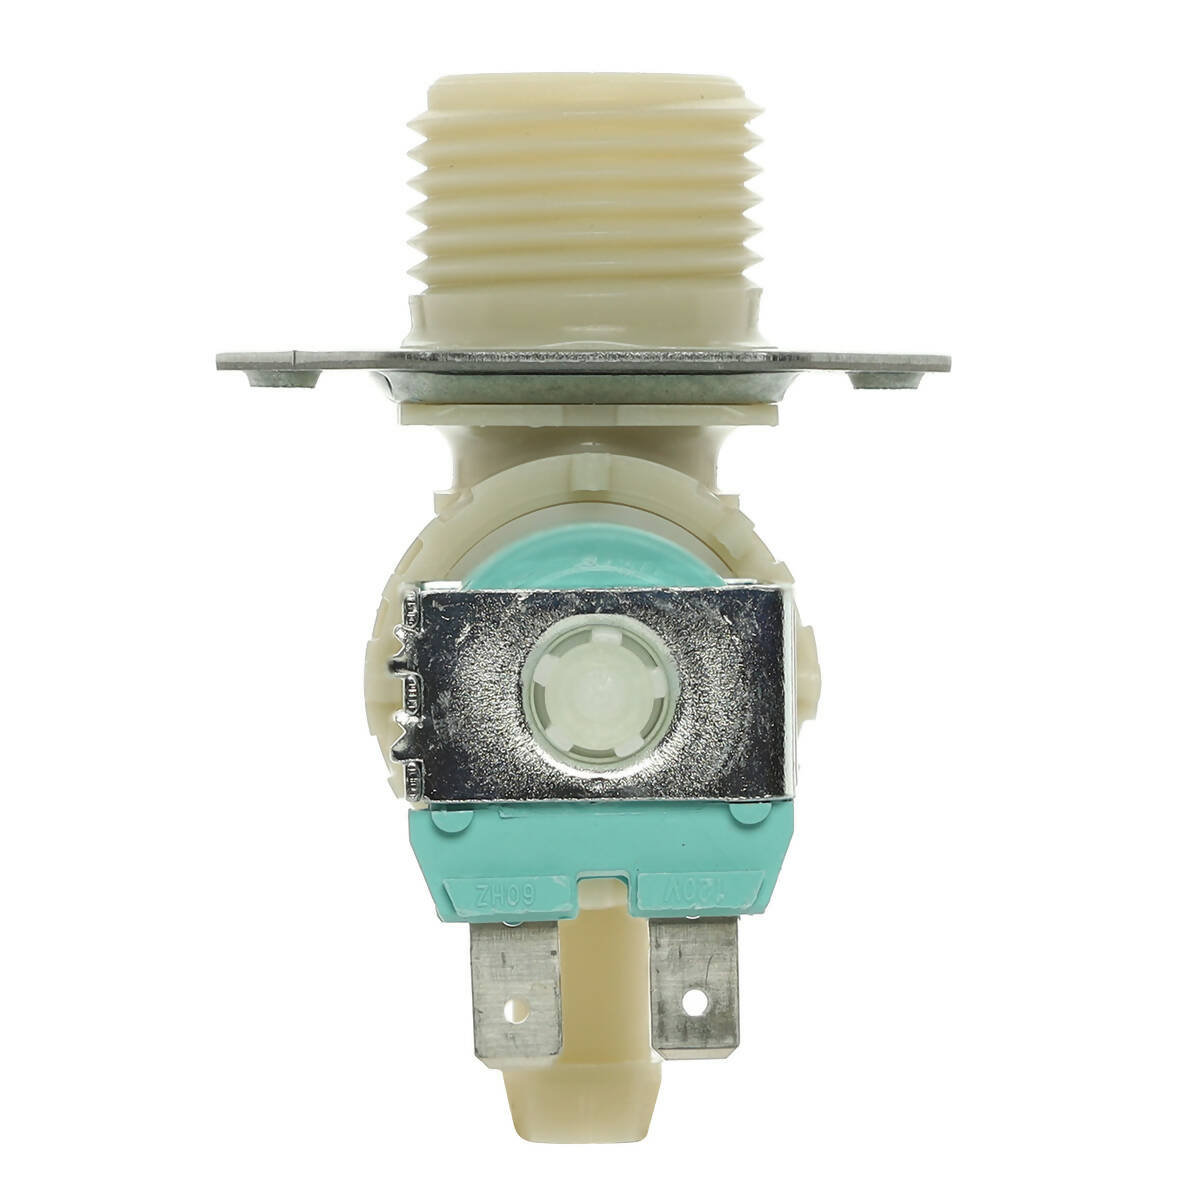 Samsung Washer Water Inlet Valve - DC62-30314L, Replaces: DC6230314L DD81-02065A DD8102065A 113113 3992459 AP5582579 PS4208749 EAP4208749 PD00041597